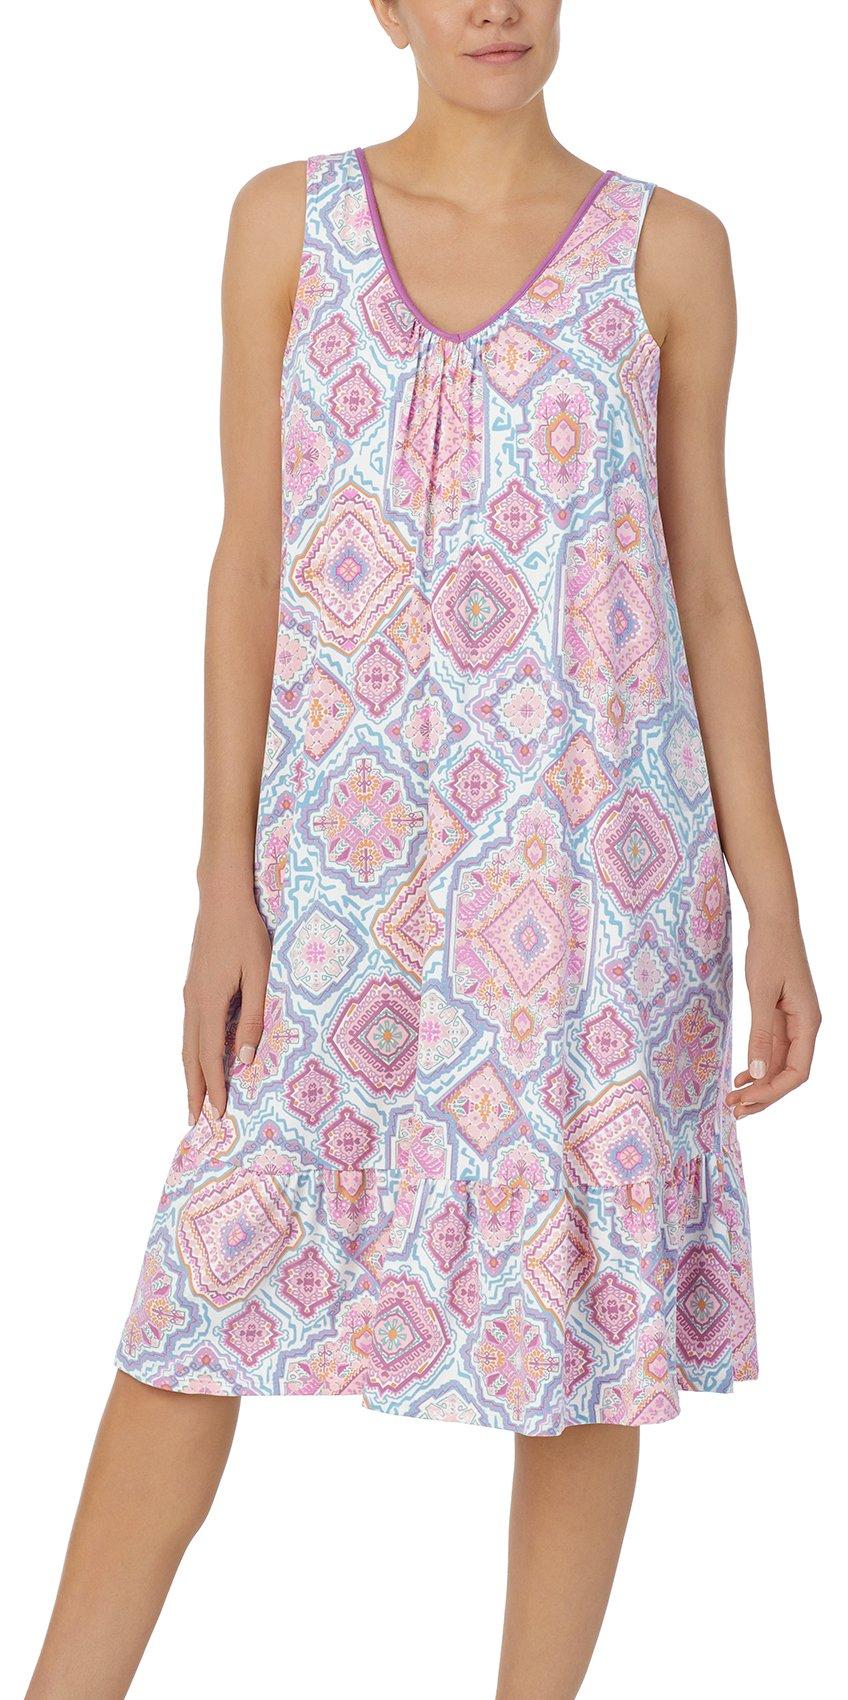 Misses 44 In. Medallion Sleeveless Nightgown